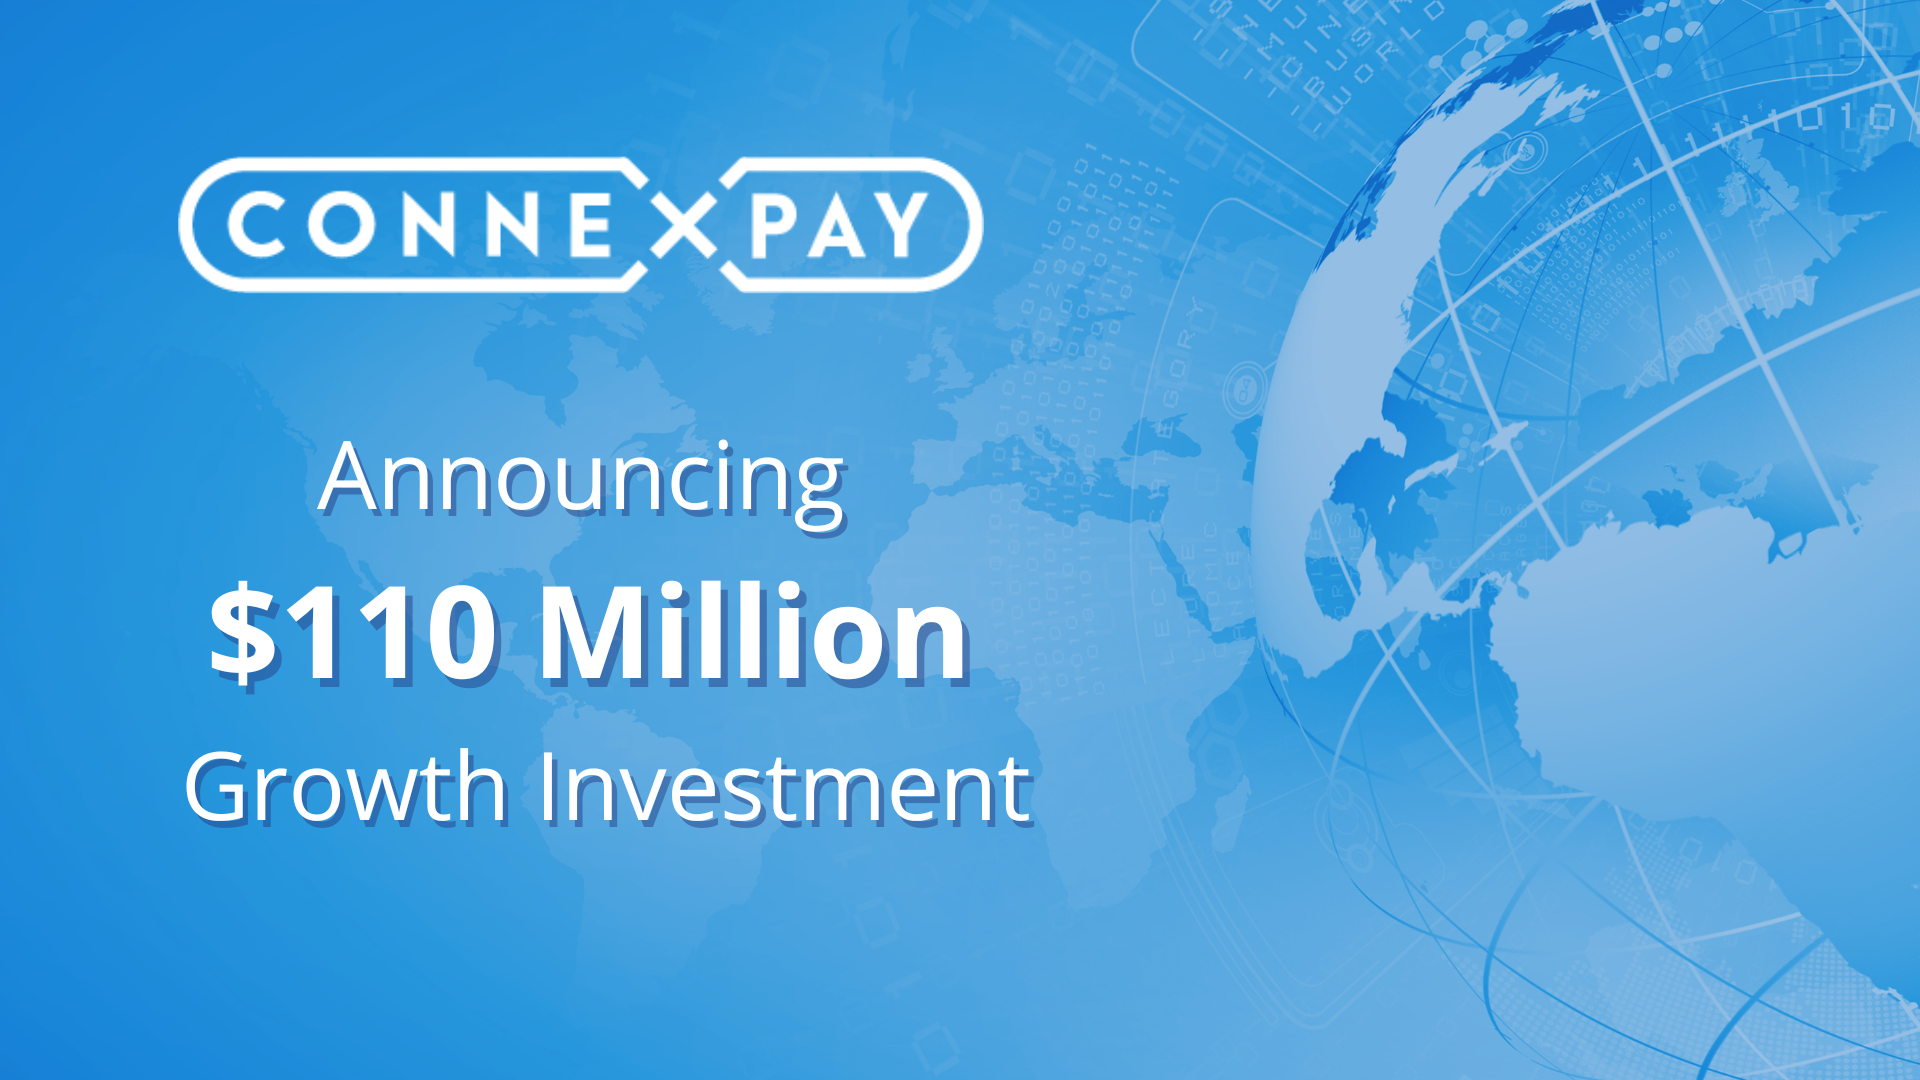 FTV Capital invests in ConnexPay